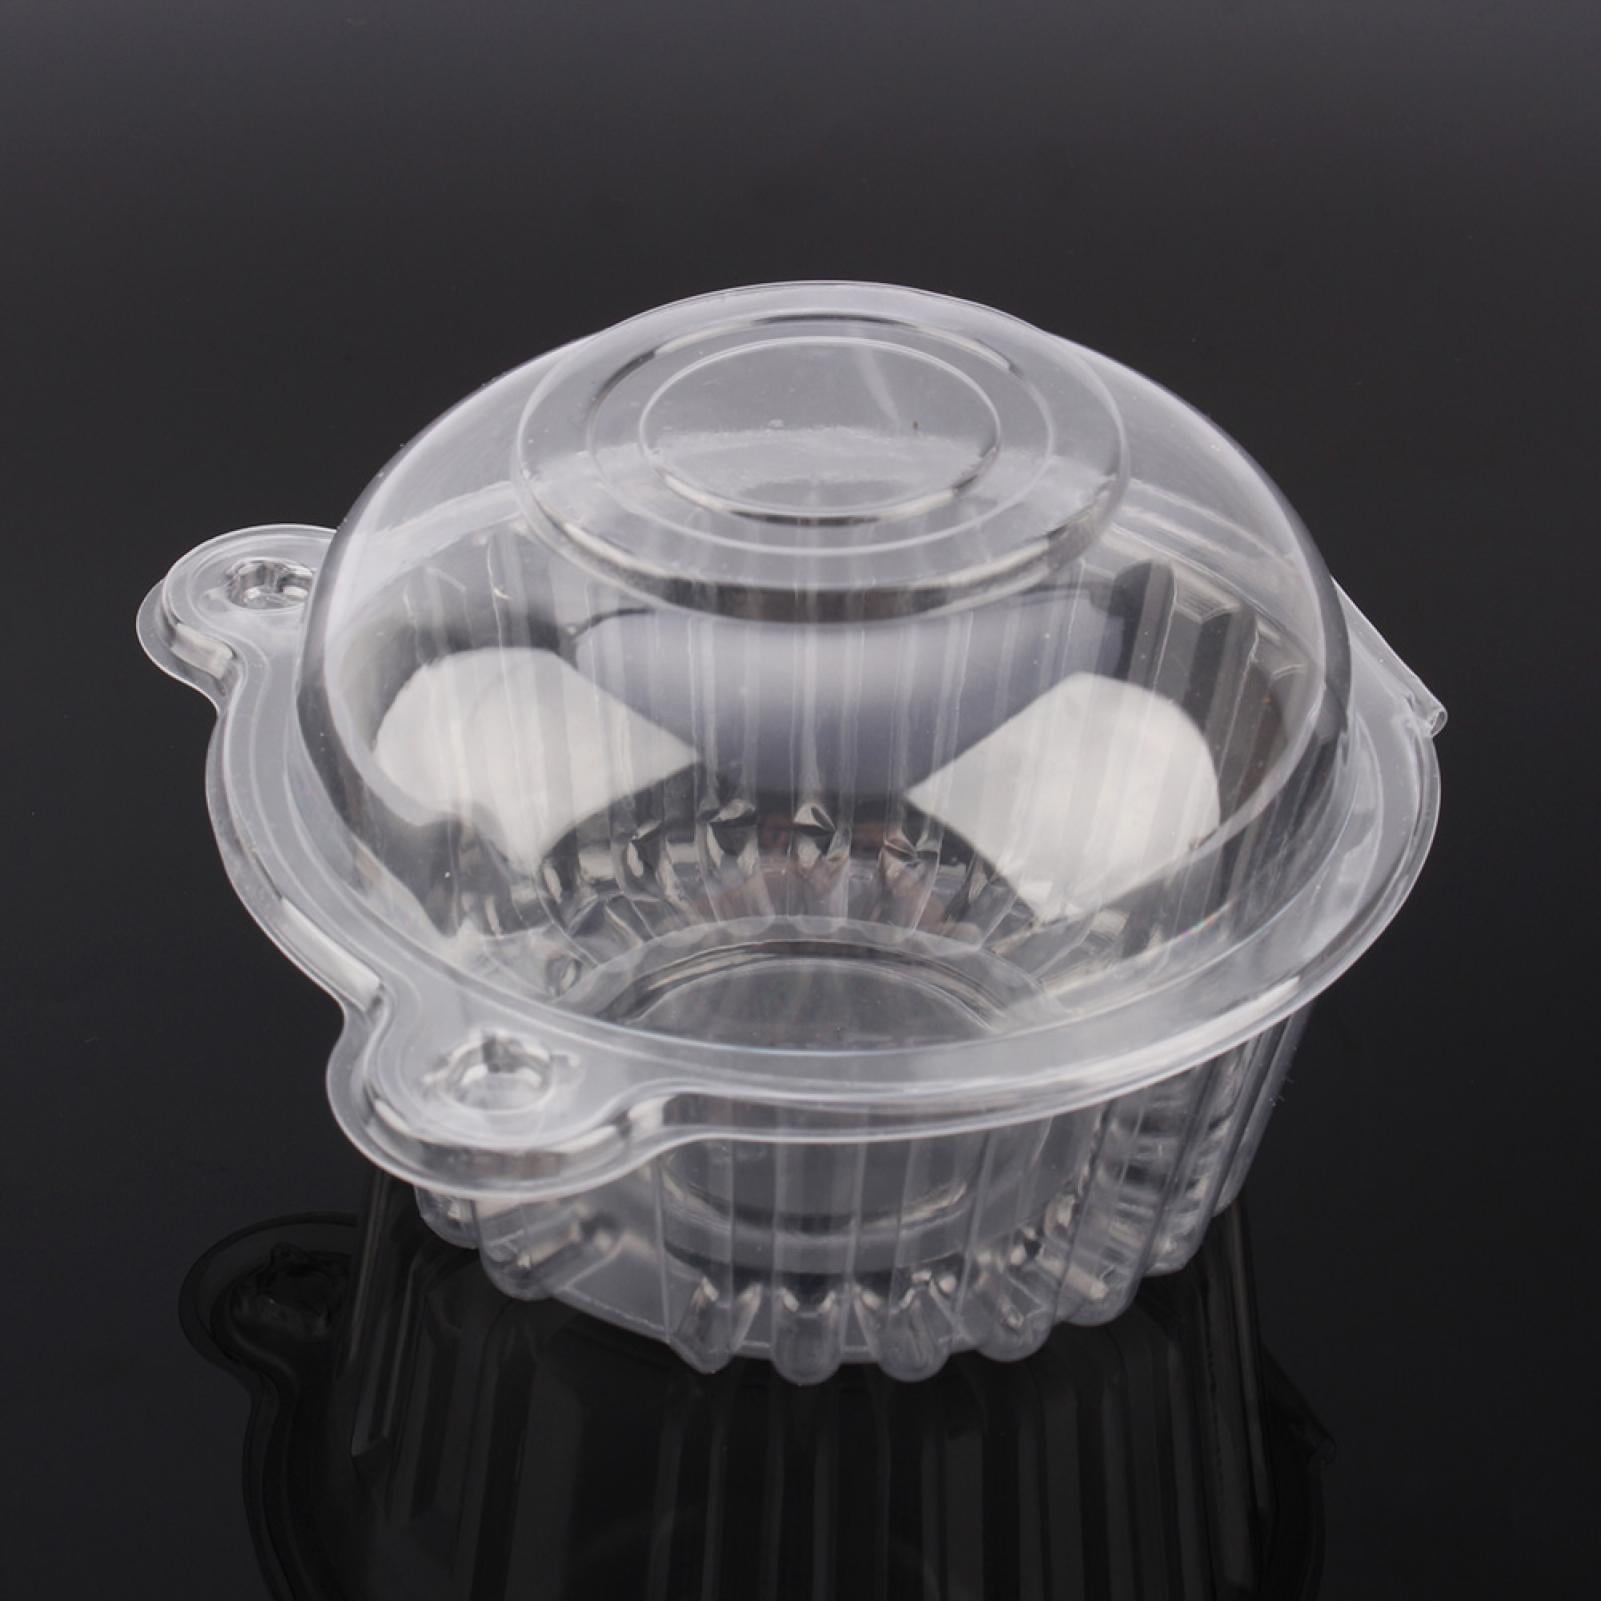 10pcs 10.5 in Cake Bakery Pastry Box Muffin Salad Cupcake Holder Box Container 